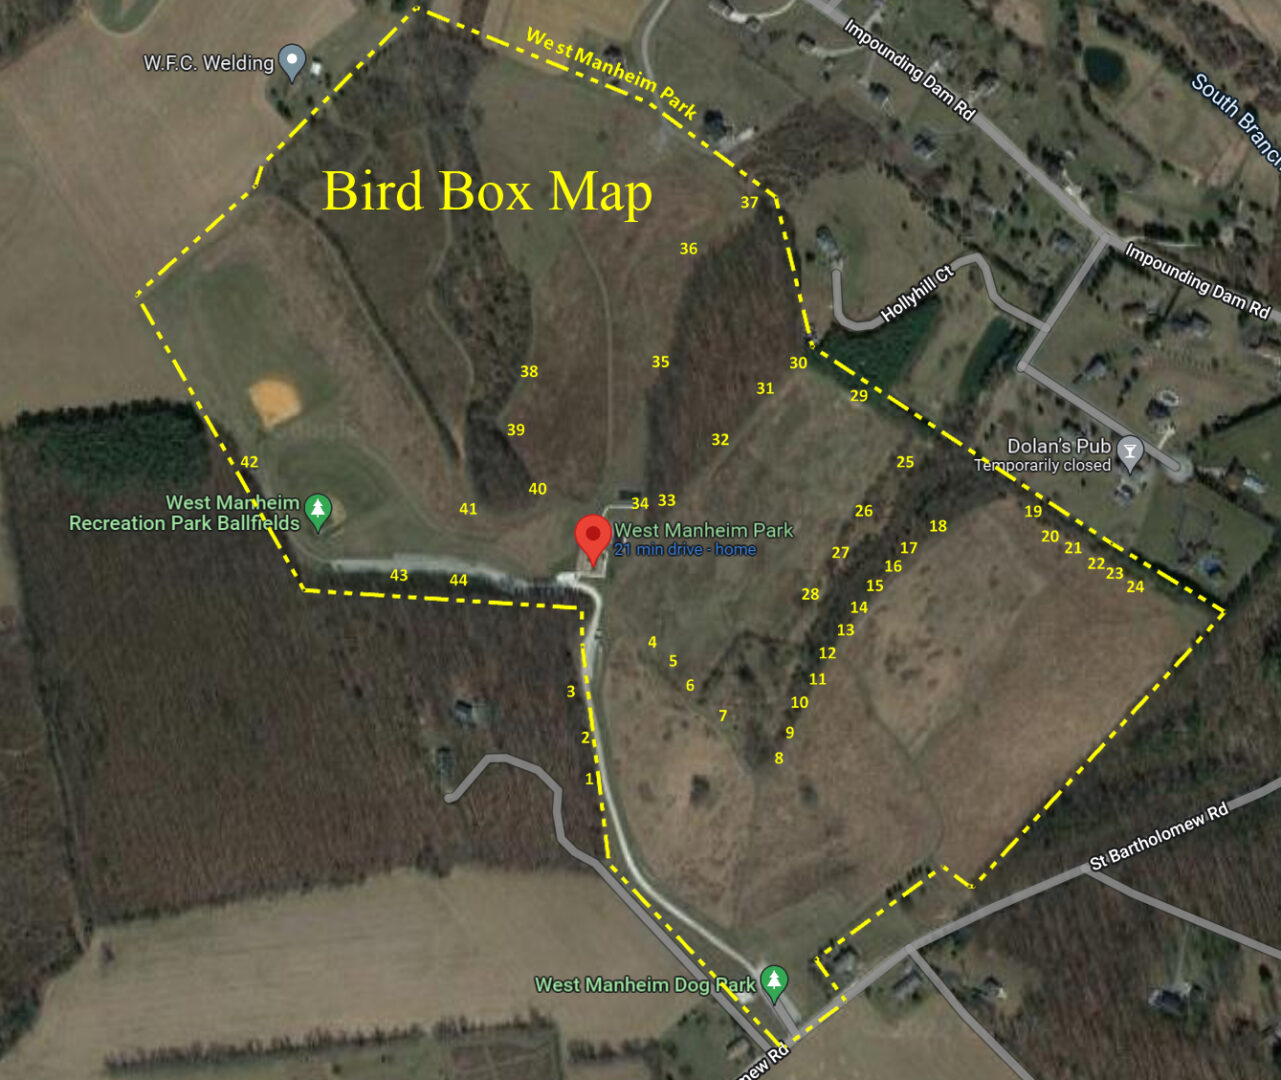 Aerial map of the West Manheim Park showing the locations of each bird box